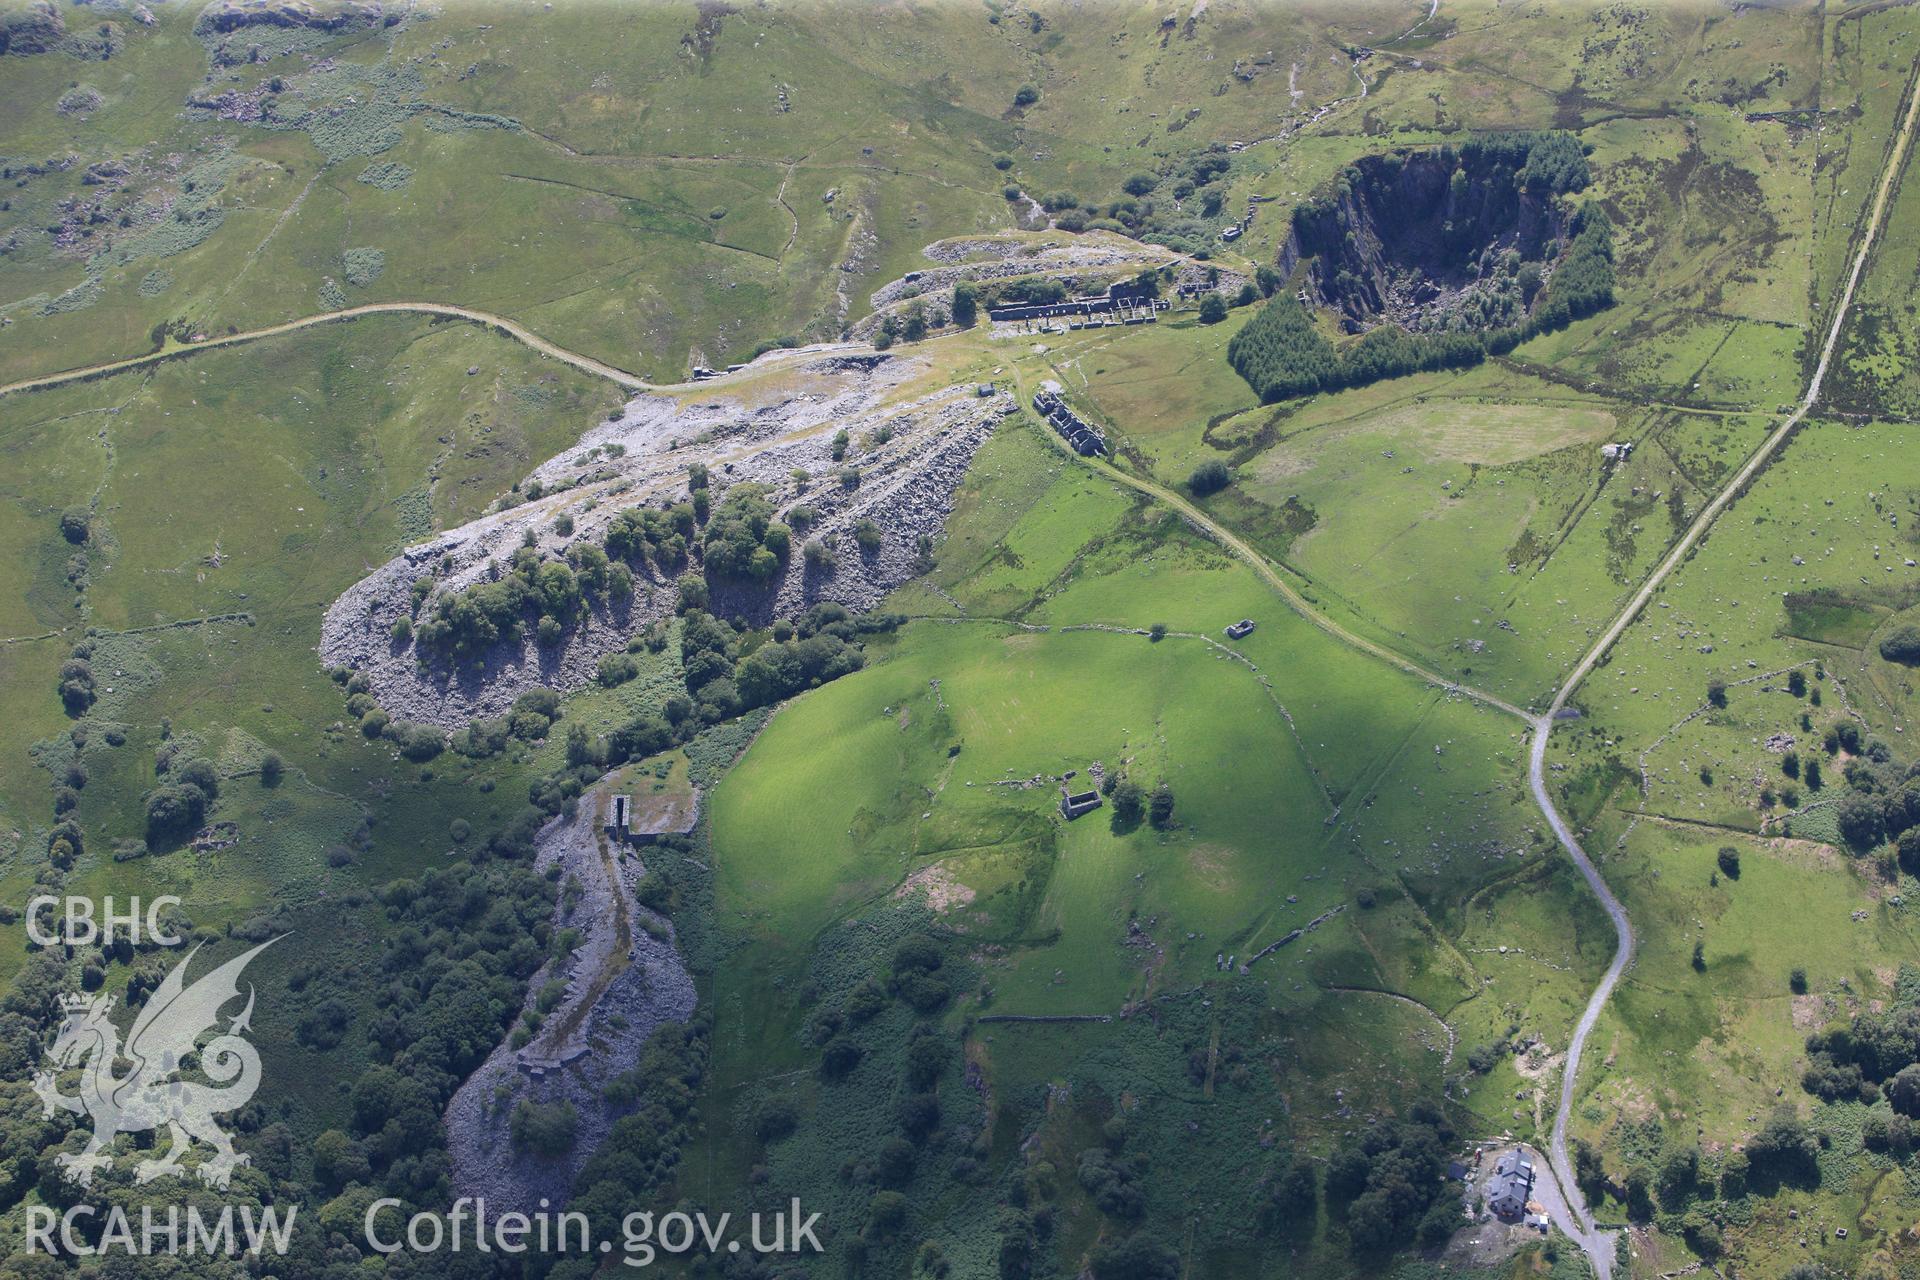 RCAHMW colour oblique photograph of Rhos Quarry. Taken by Toby Driver on 20/07/2011.